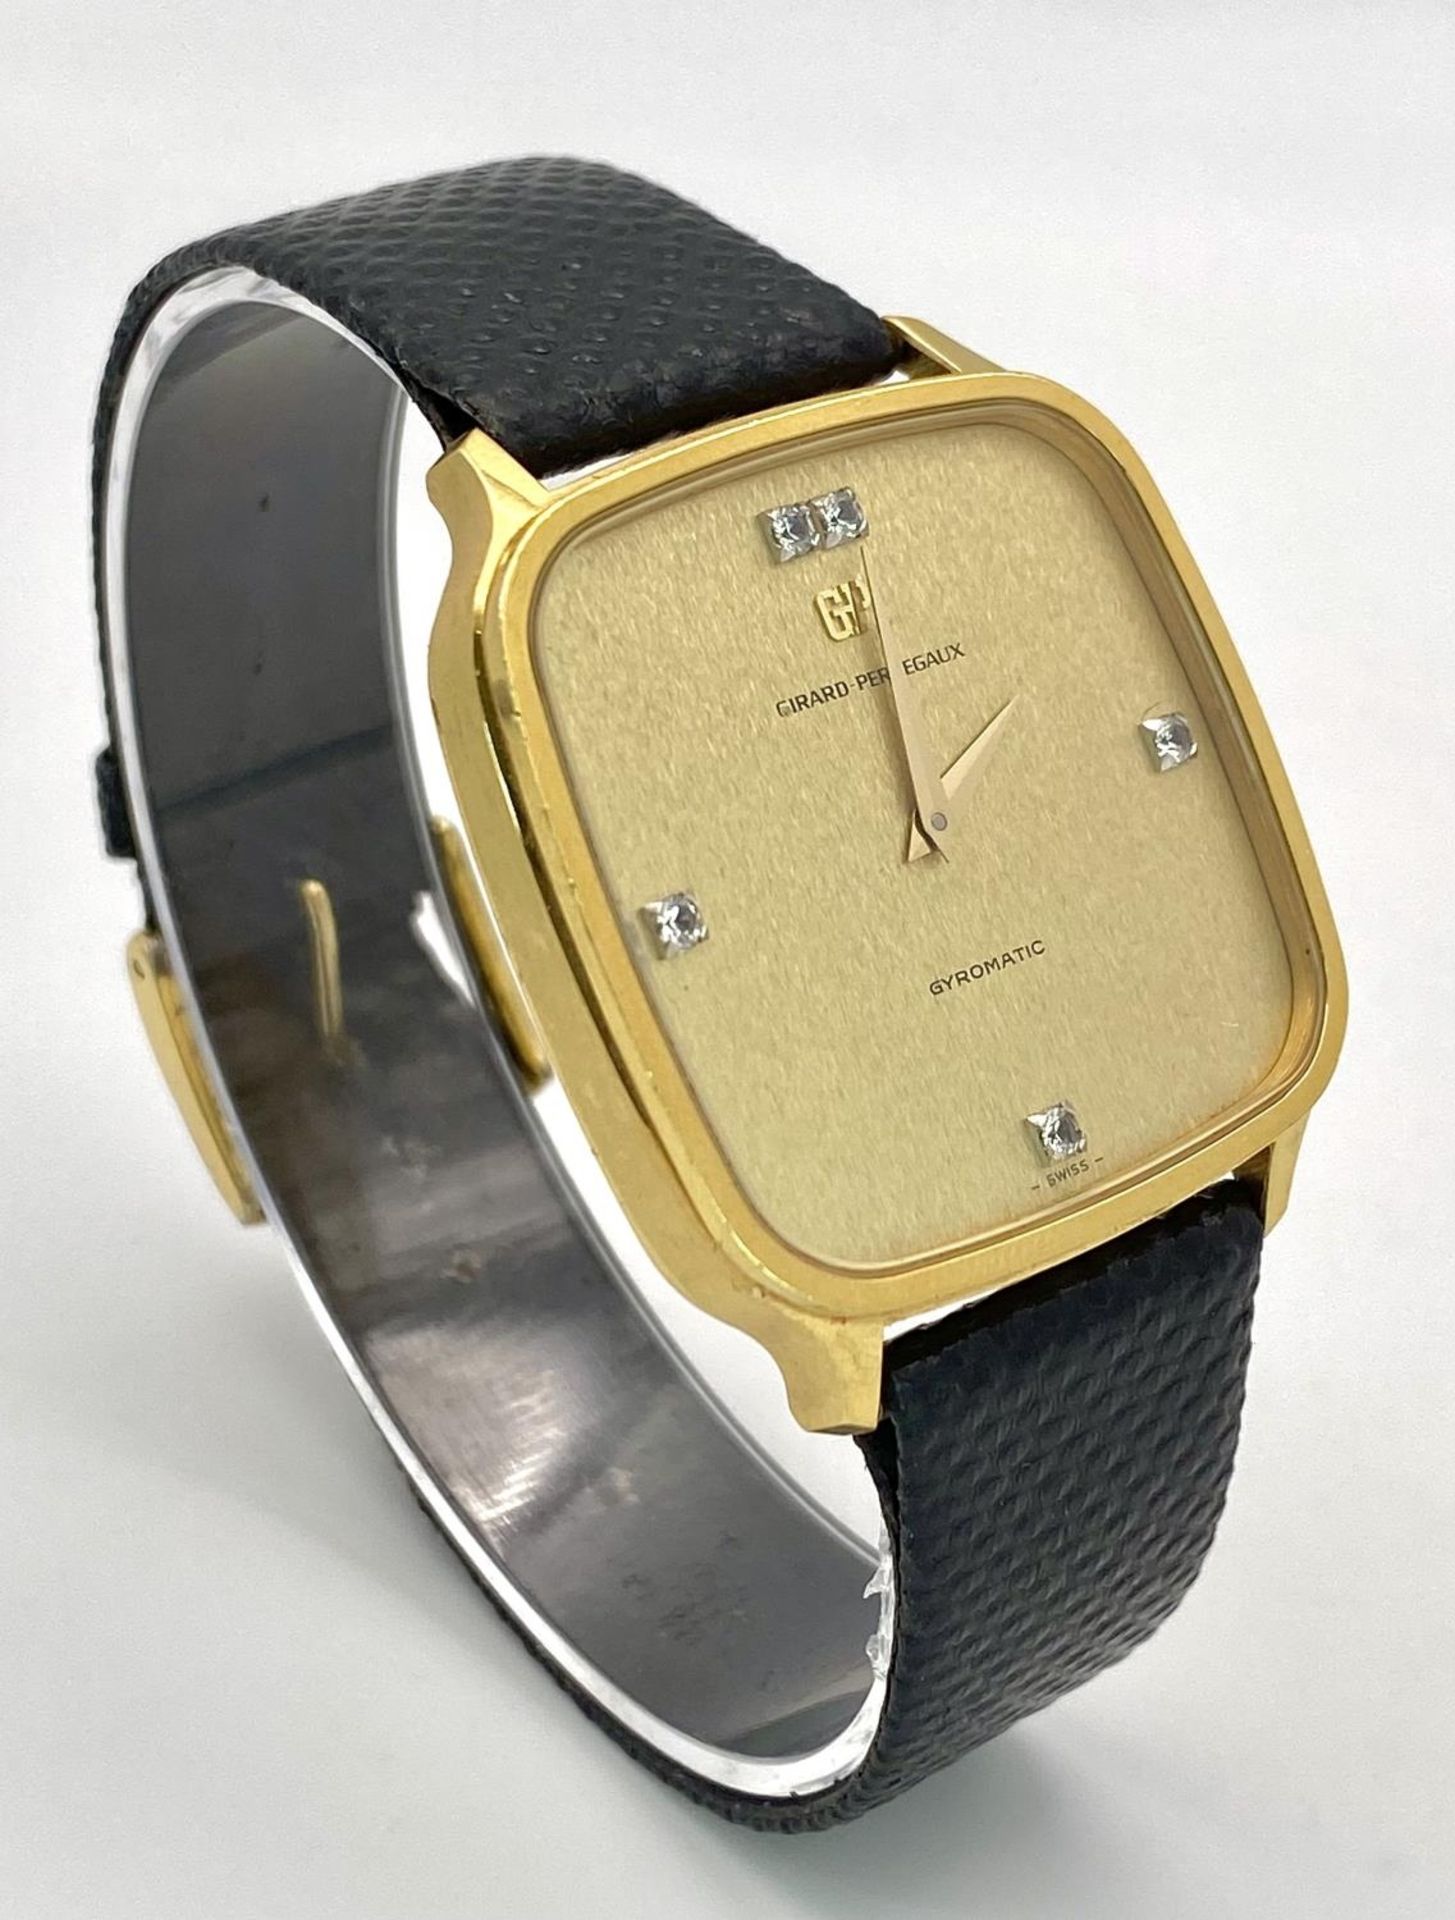 A Girard Perregaux Gold Plated Gyromatic Gents Watch. Black leather strap. Gold plated case -